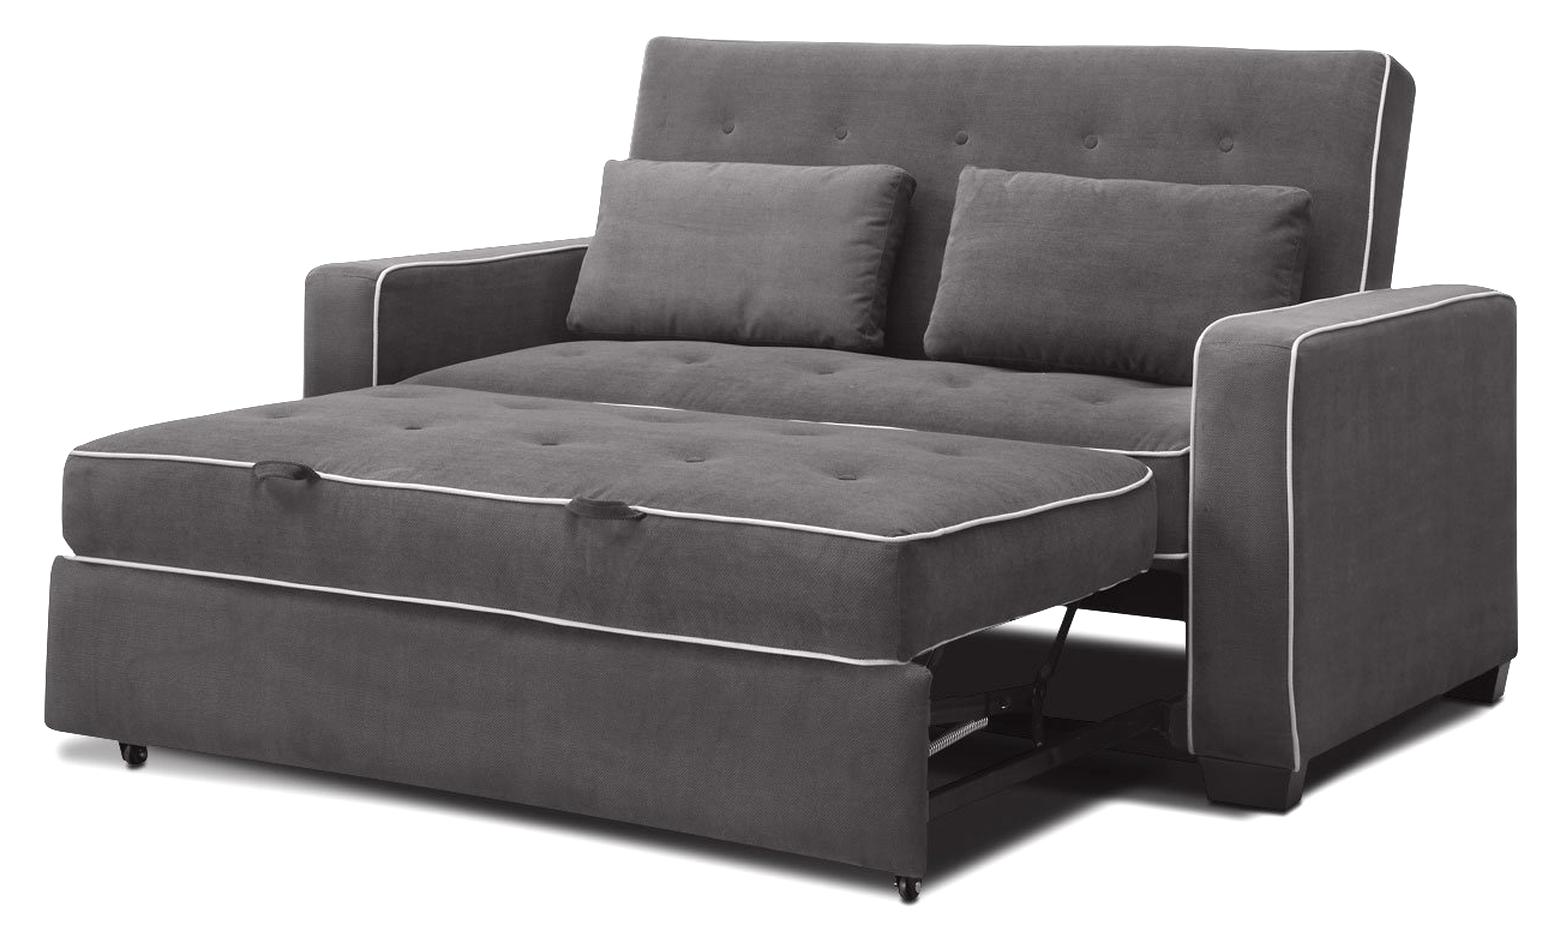 cheapest sofa bed uk